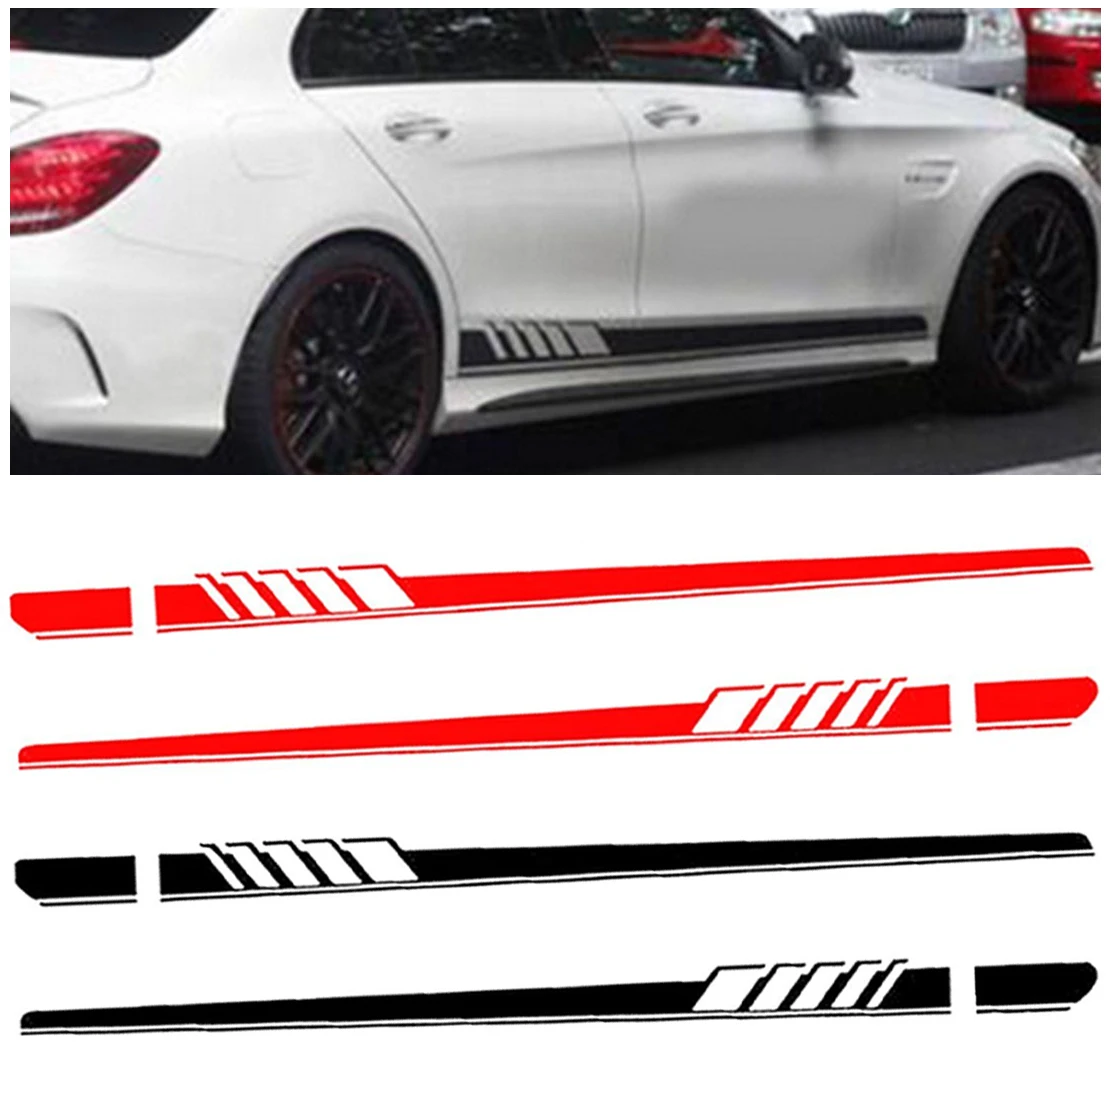 CITALL New 2pcs Car Side Body Vinyl Decal  Graphic Long 